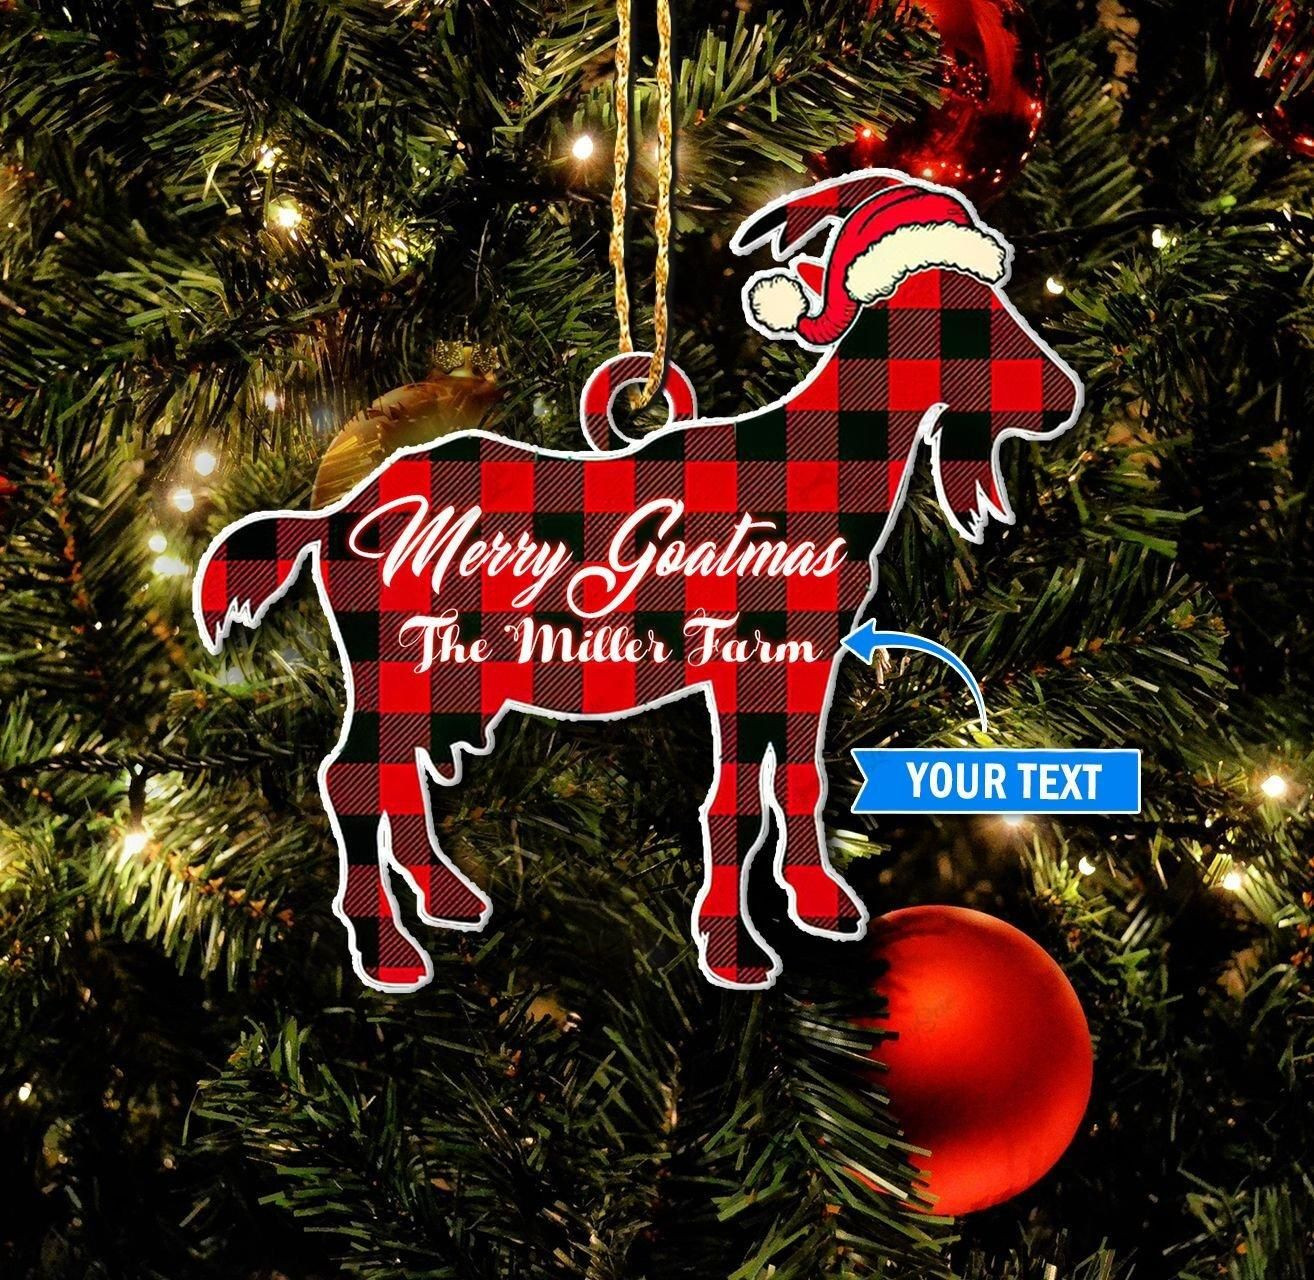 Merry Goatmas Personalized Ornament PANORPG0289